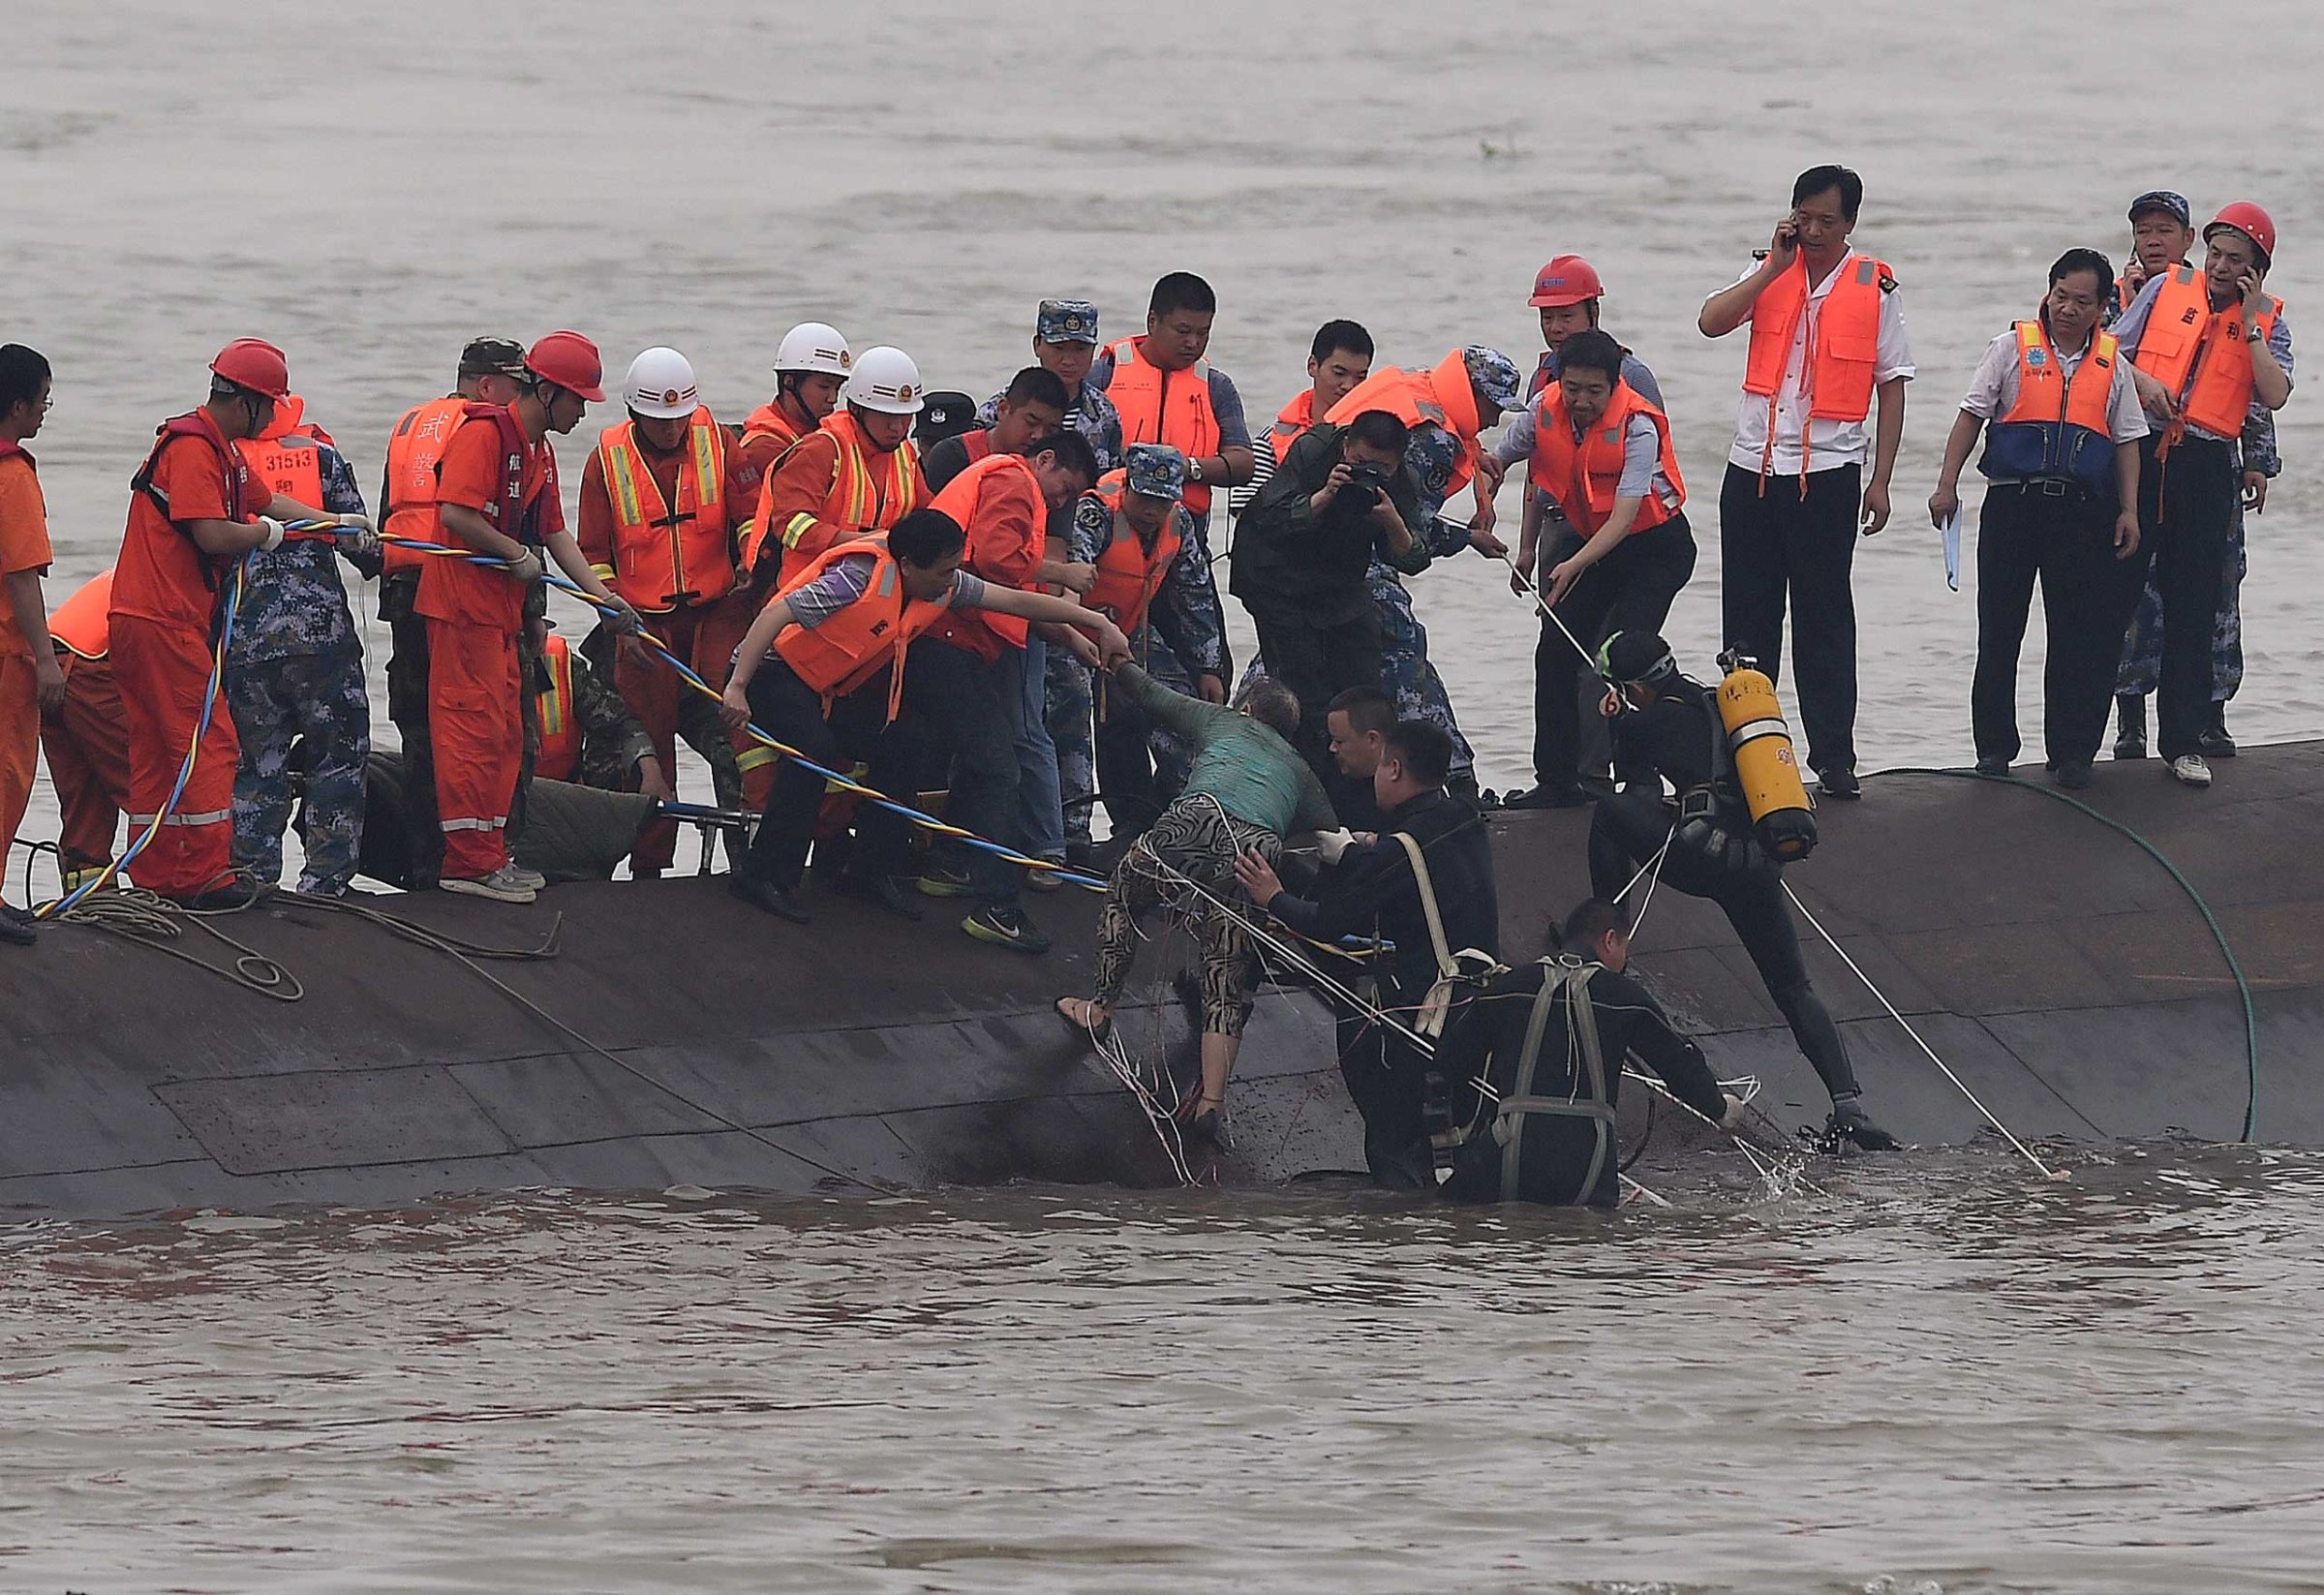 Rescuers save a survivor, center, from the overturned passenger ship in the Jianli section of the Yangtze River in central China's Hubei Province on June 2, 2015.